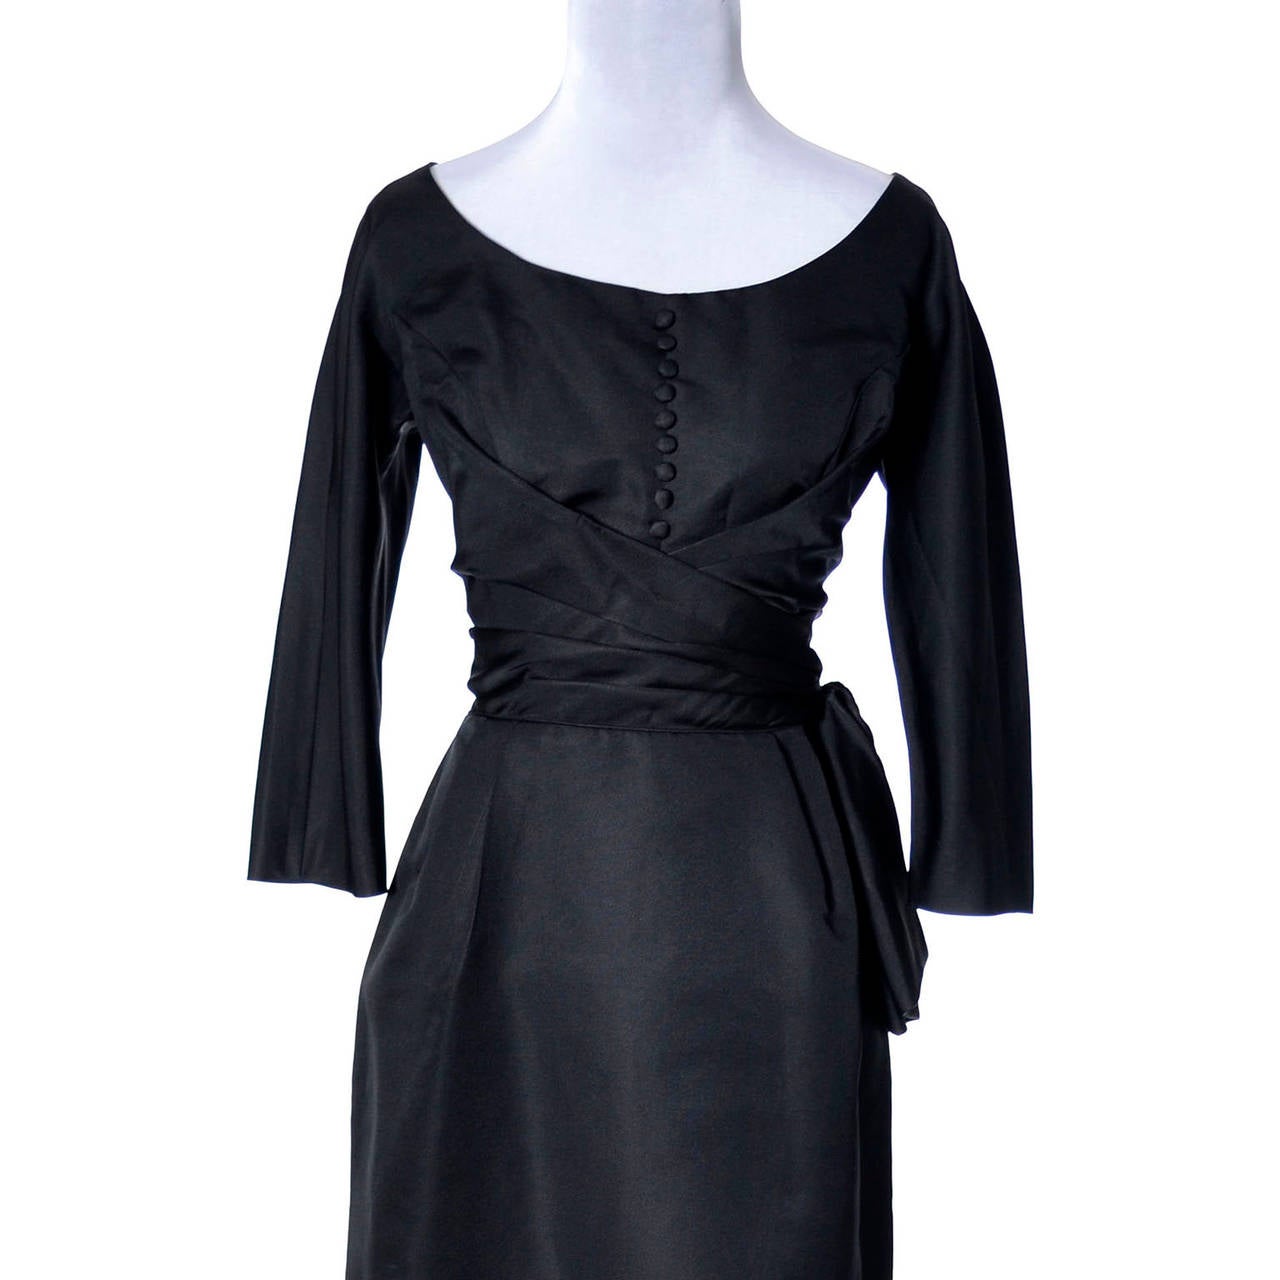 This stunning Vintage dress designed by Max Lawrence was purchased at B. Altman & Co. on Fifth Avenue in New York in the early 1950's. This gorgeous black vintage dress is very flattering with back zipper, side bow and tiny covered buttons on the